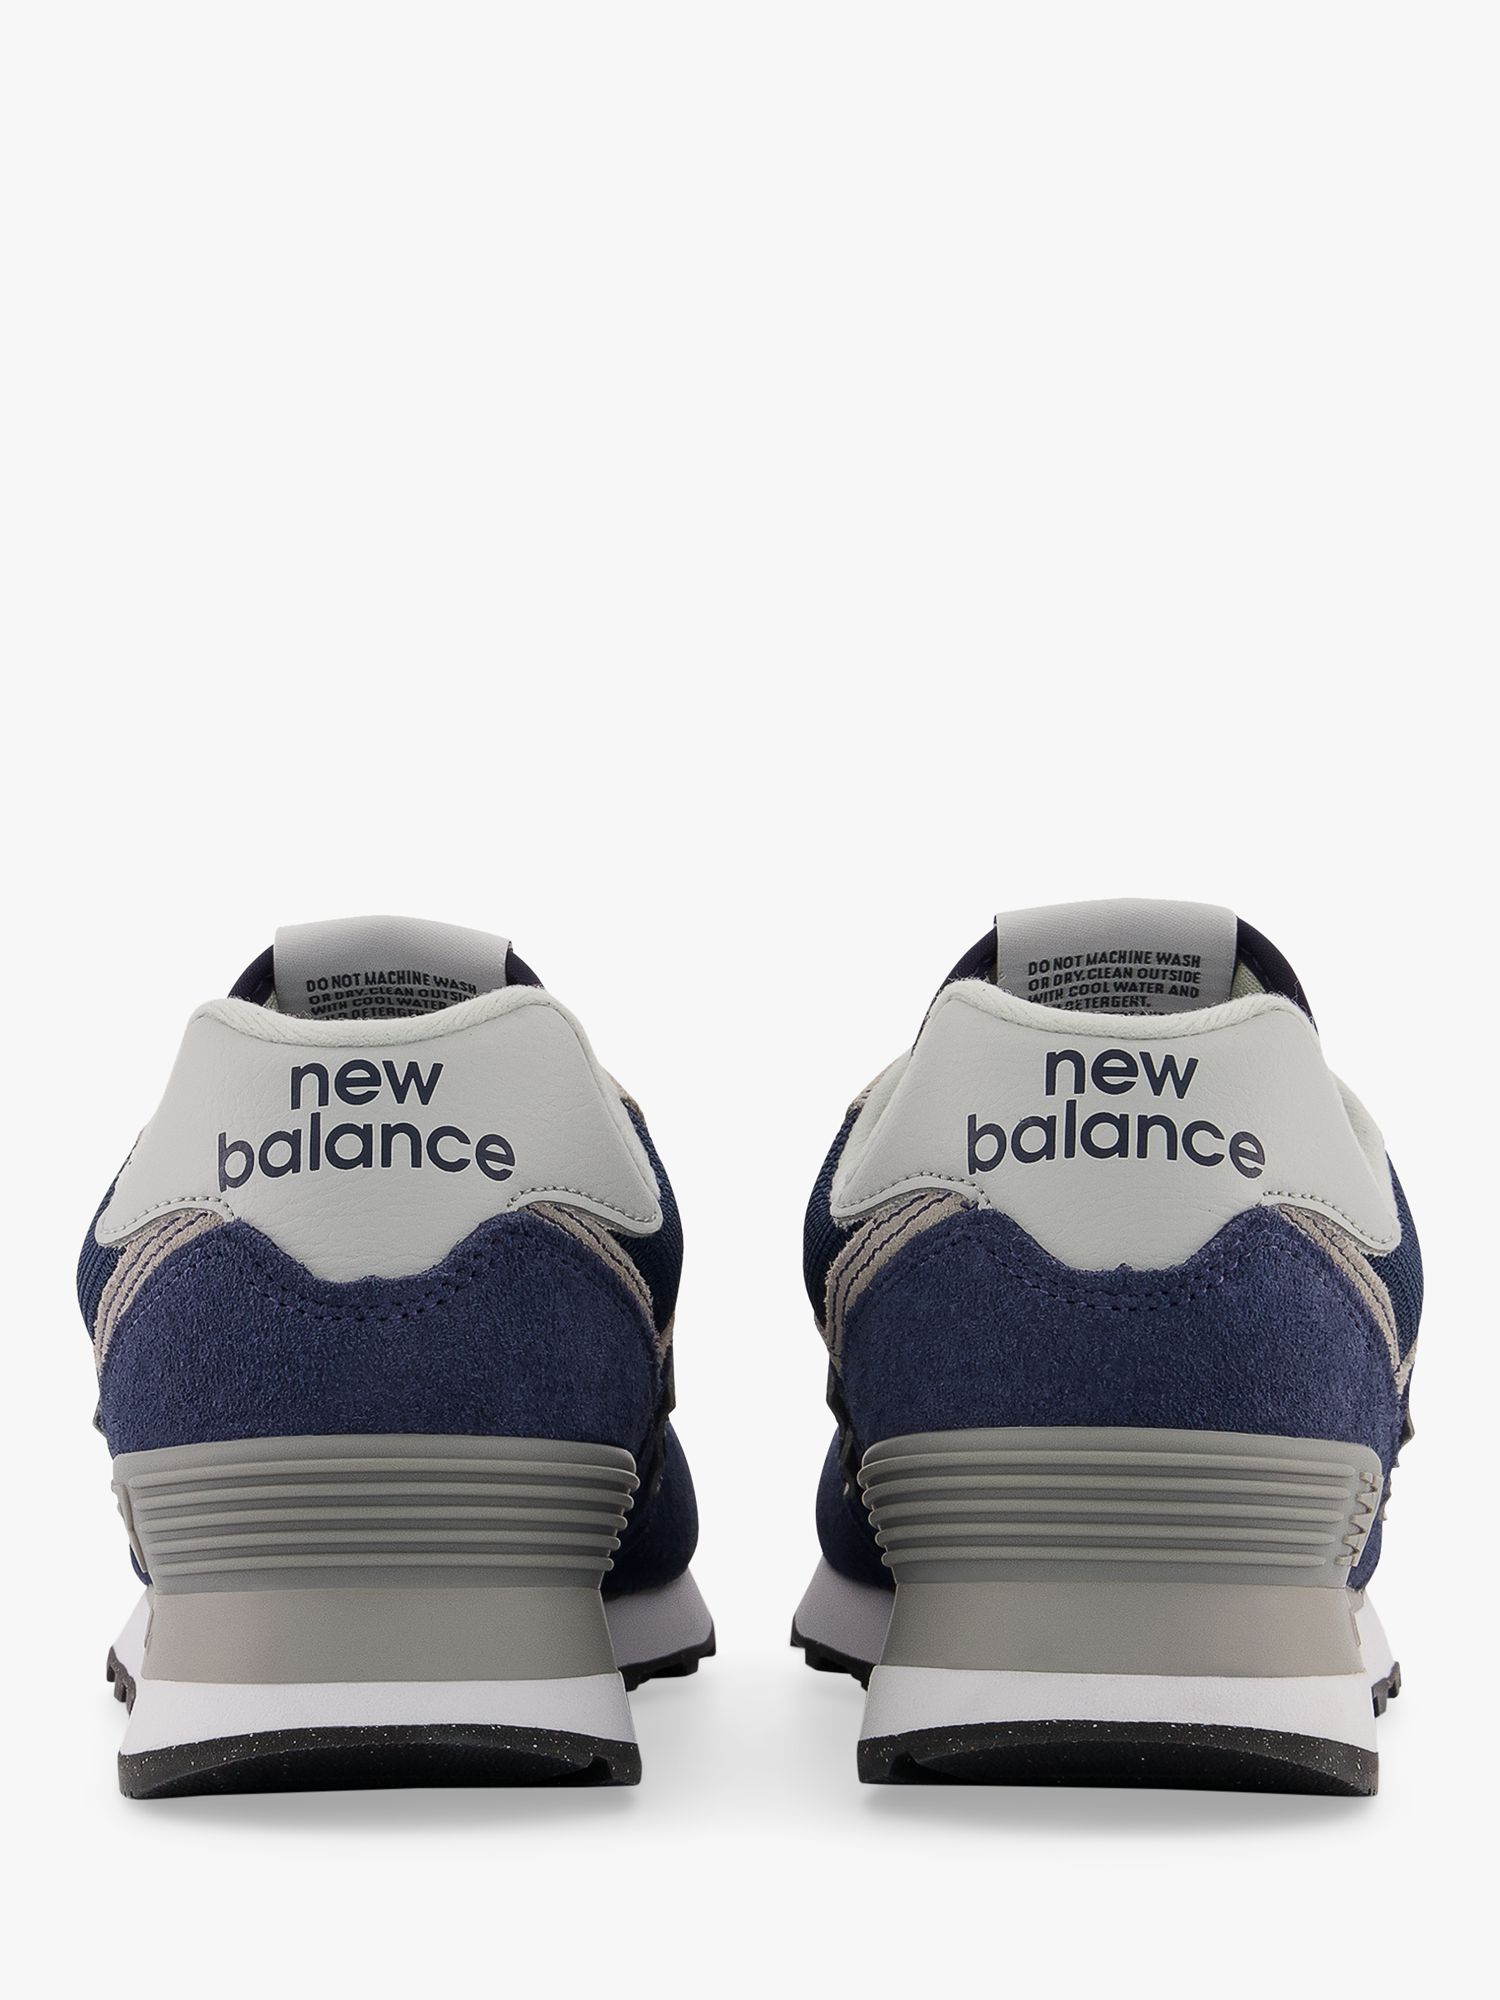 New Balance 574v3 Trainers, Navy/White at John Lewis & Partners